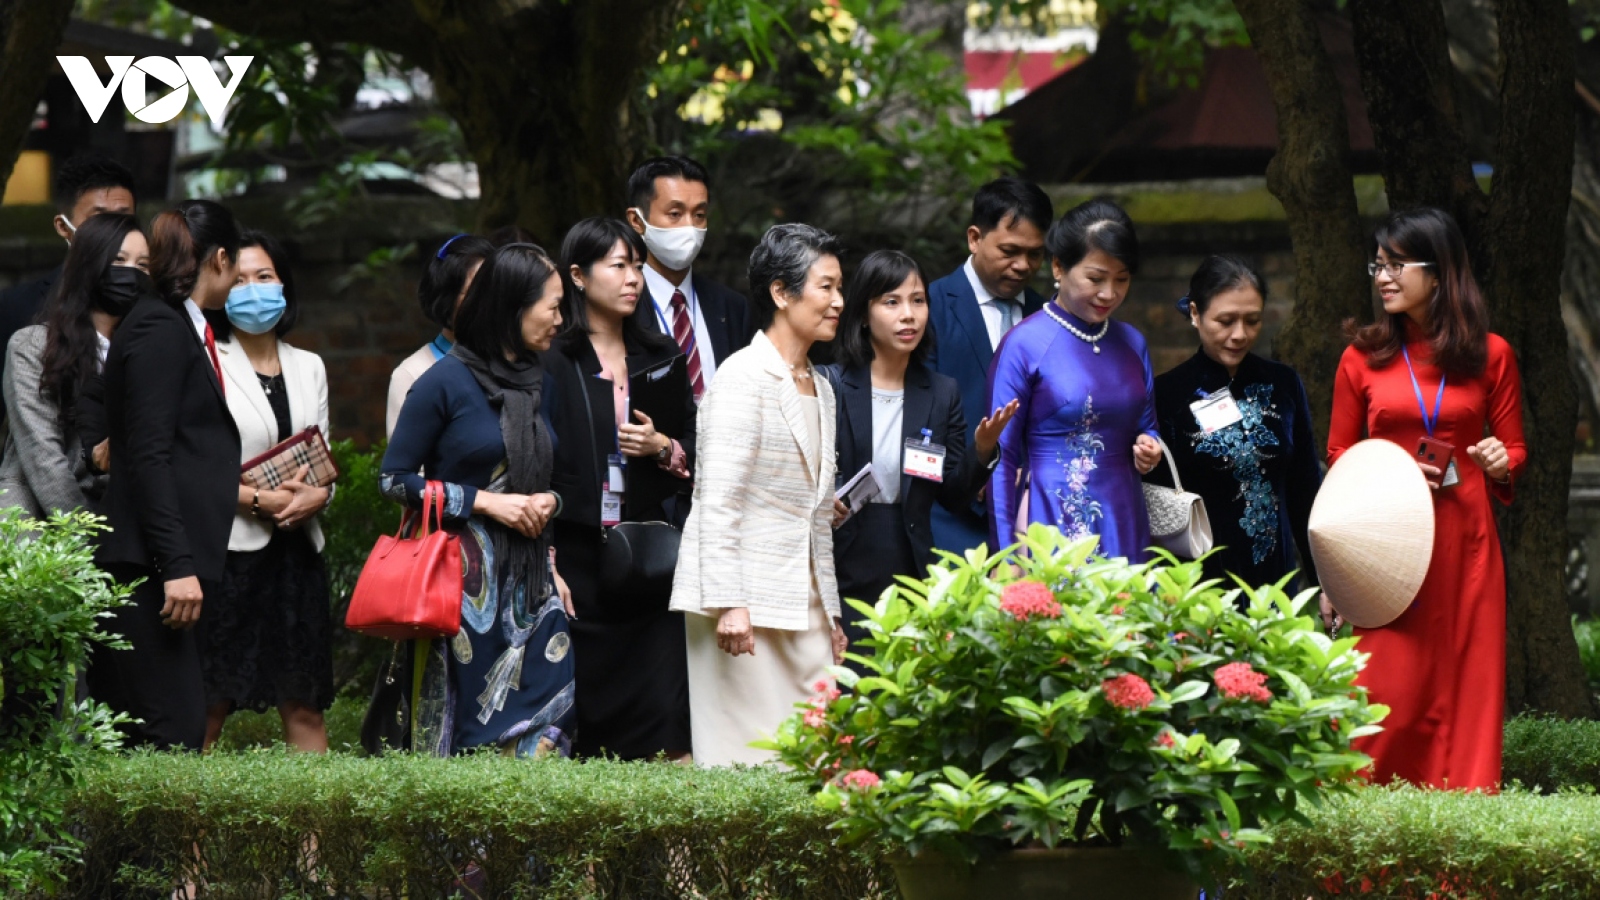 Wife of Japanese PM enjoys visit to Temple of Literature